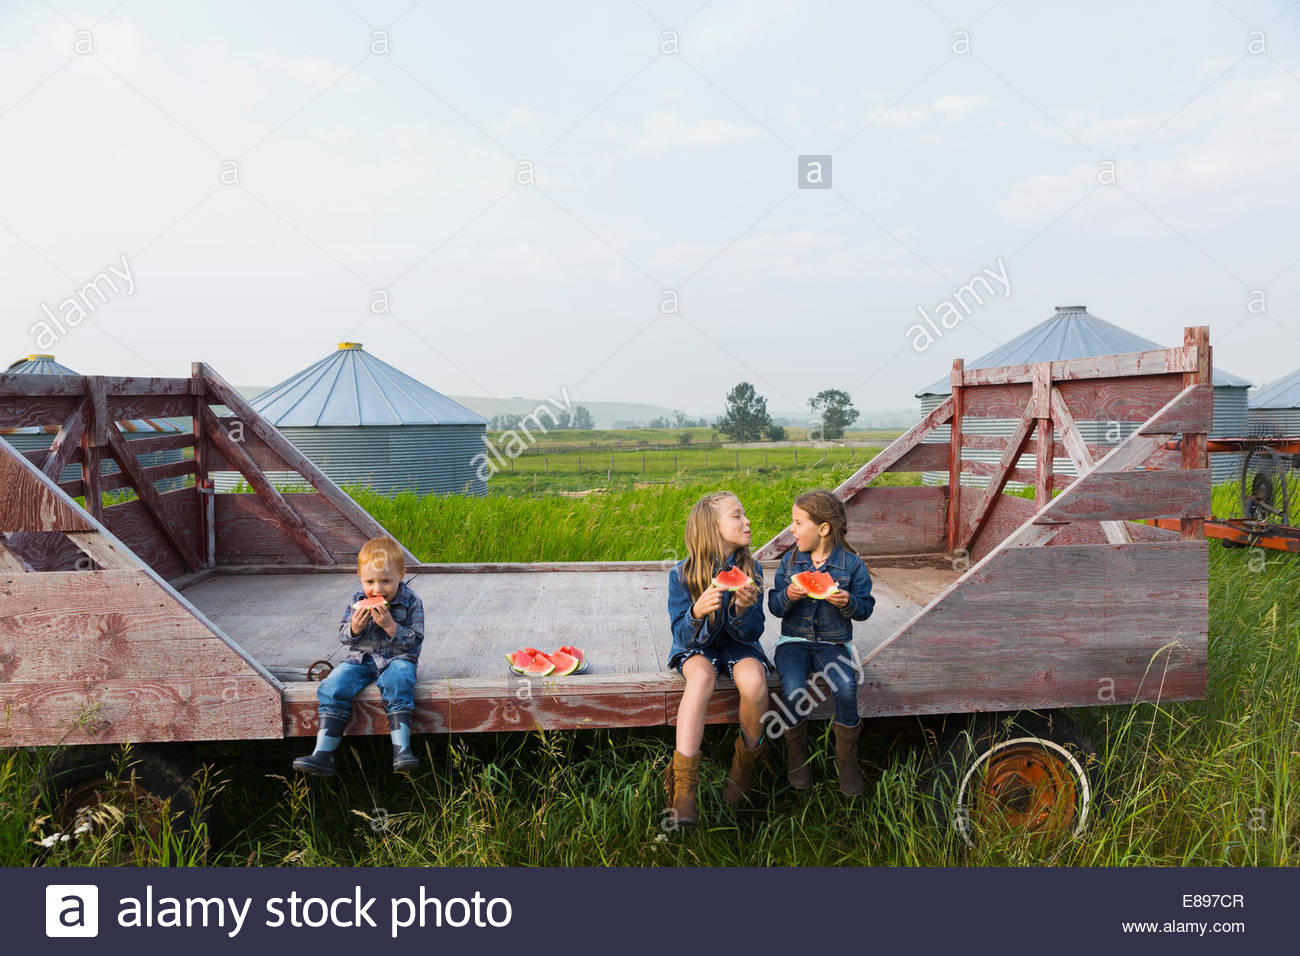 Girls and boy eating watermelon on farm Stock Photo